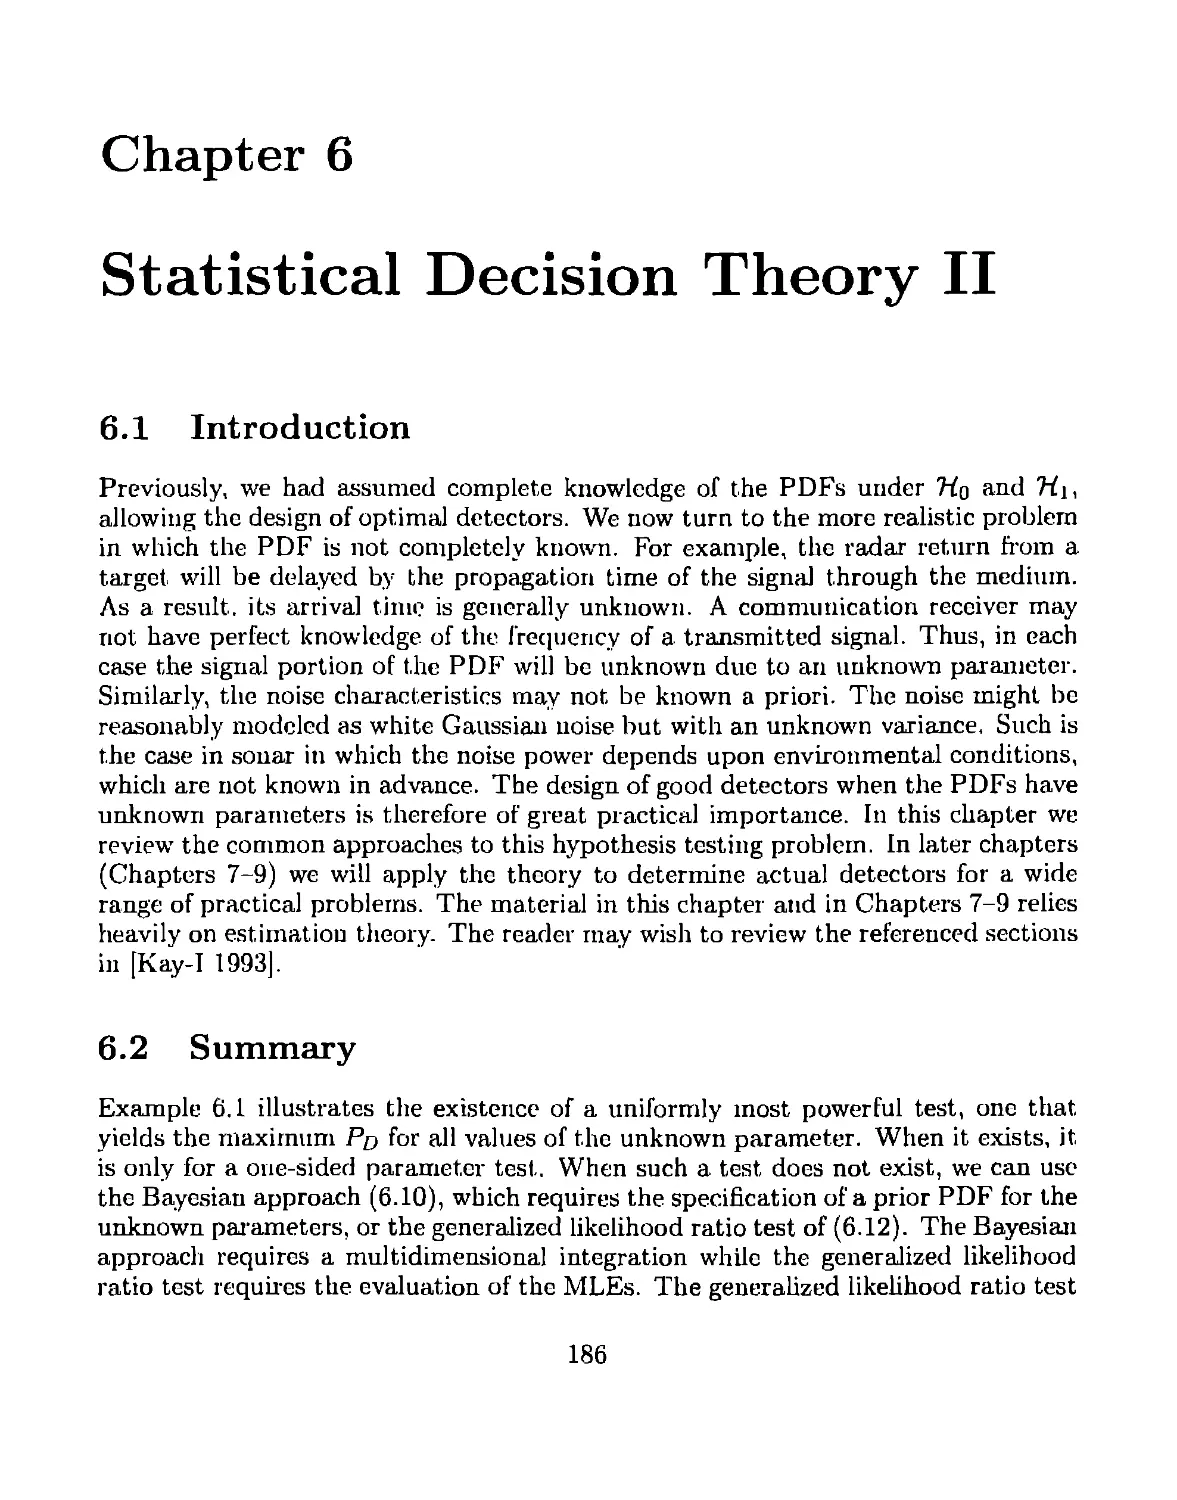 6 Statistical Decision Theory II
6.2 Summary